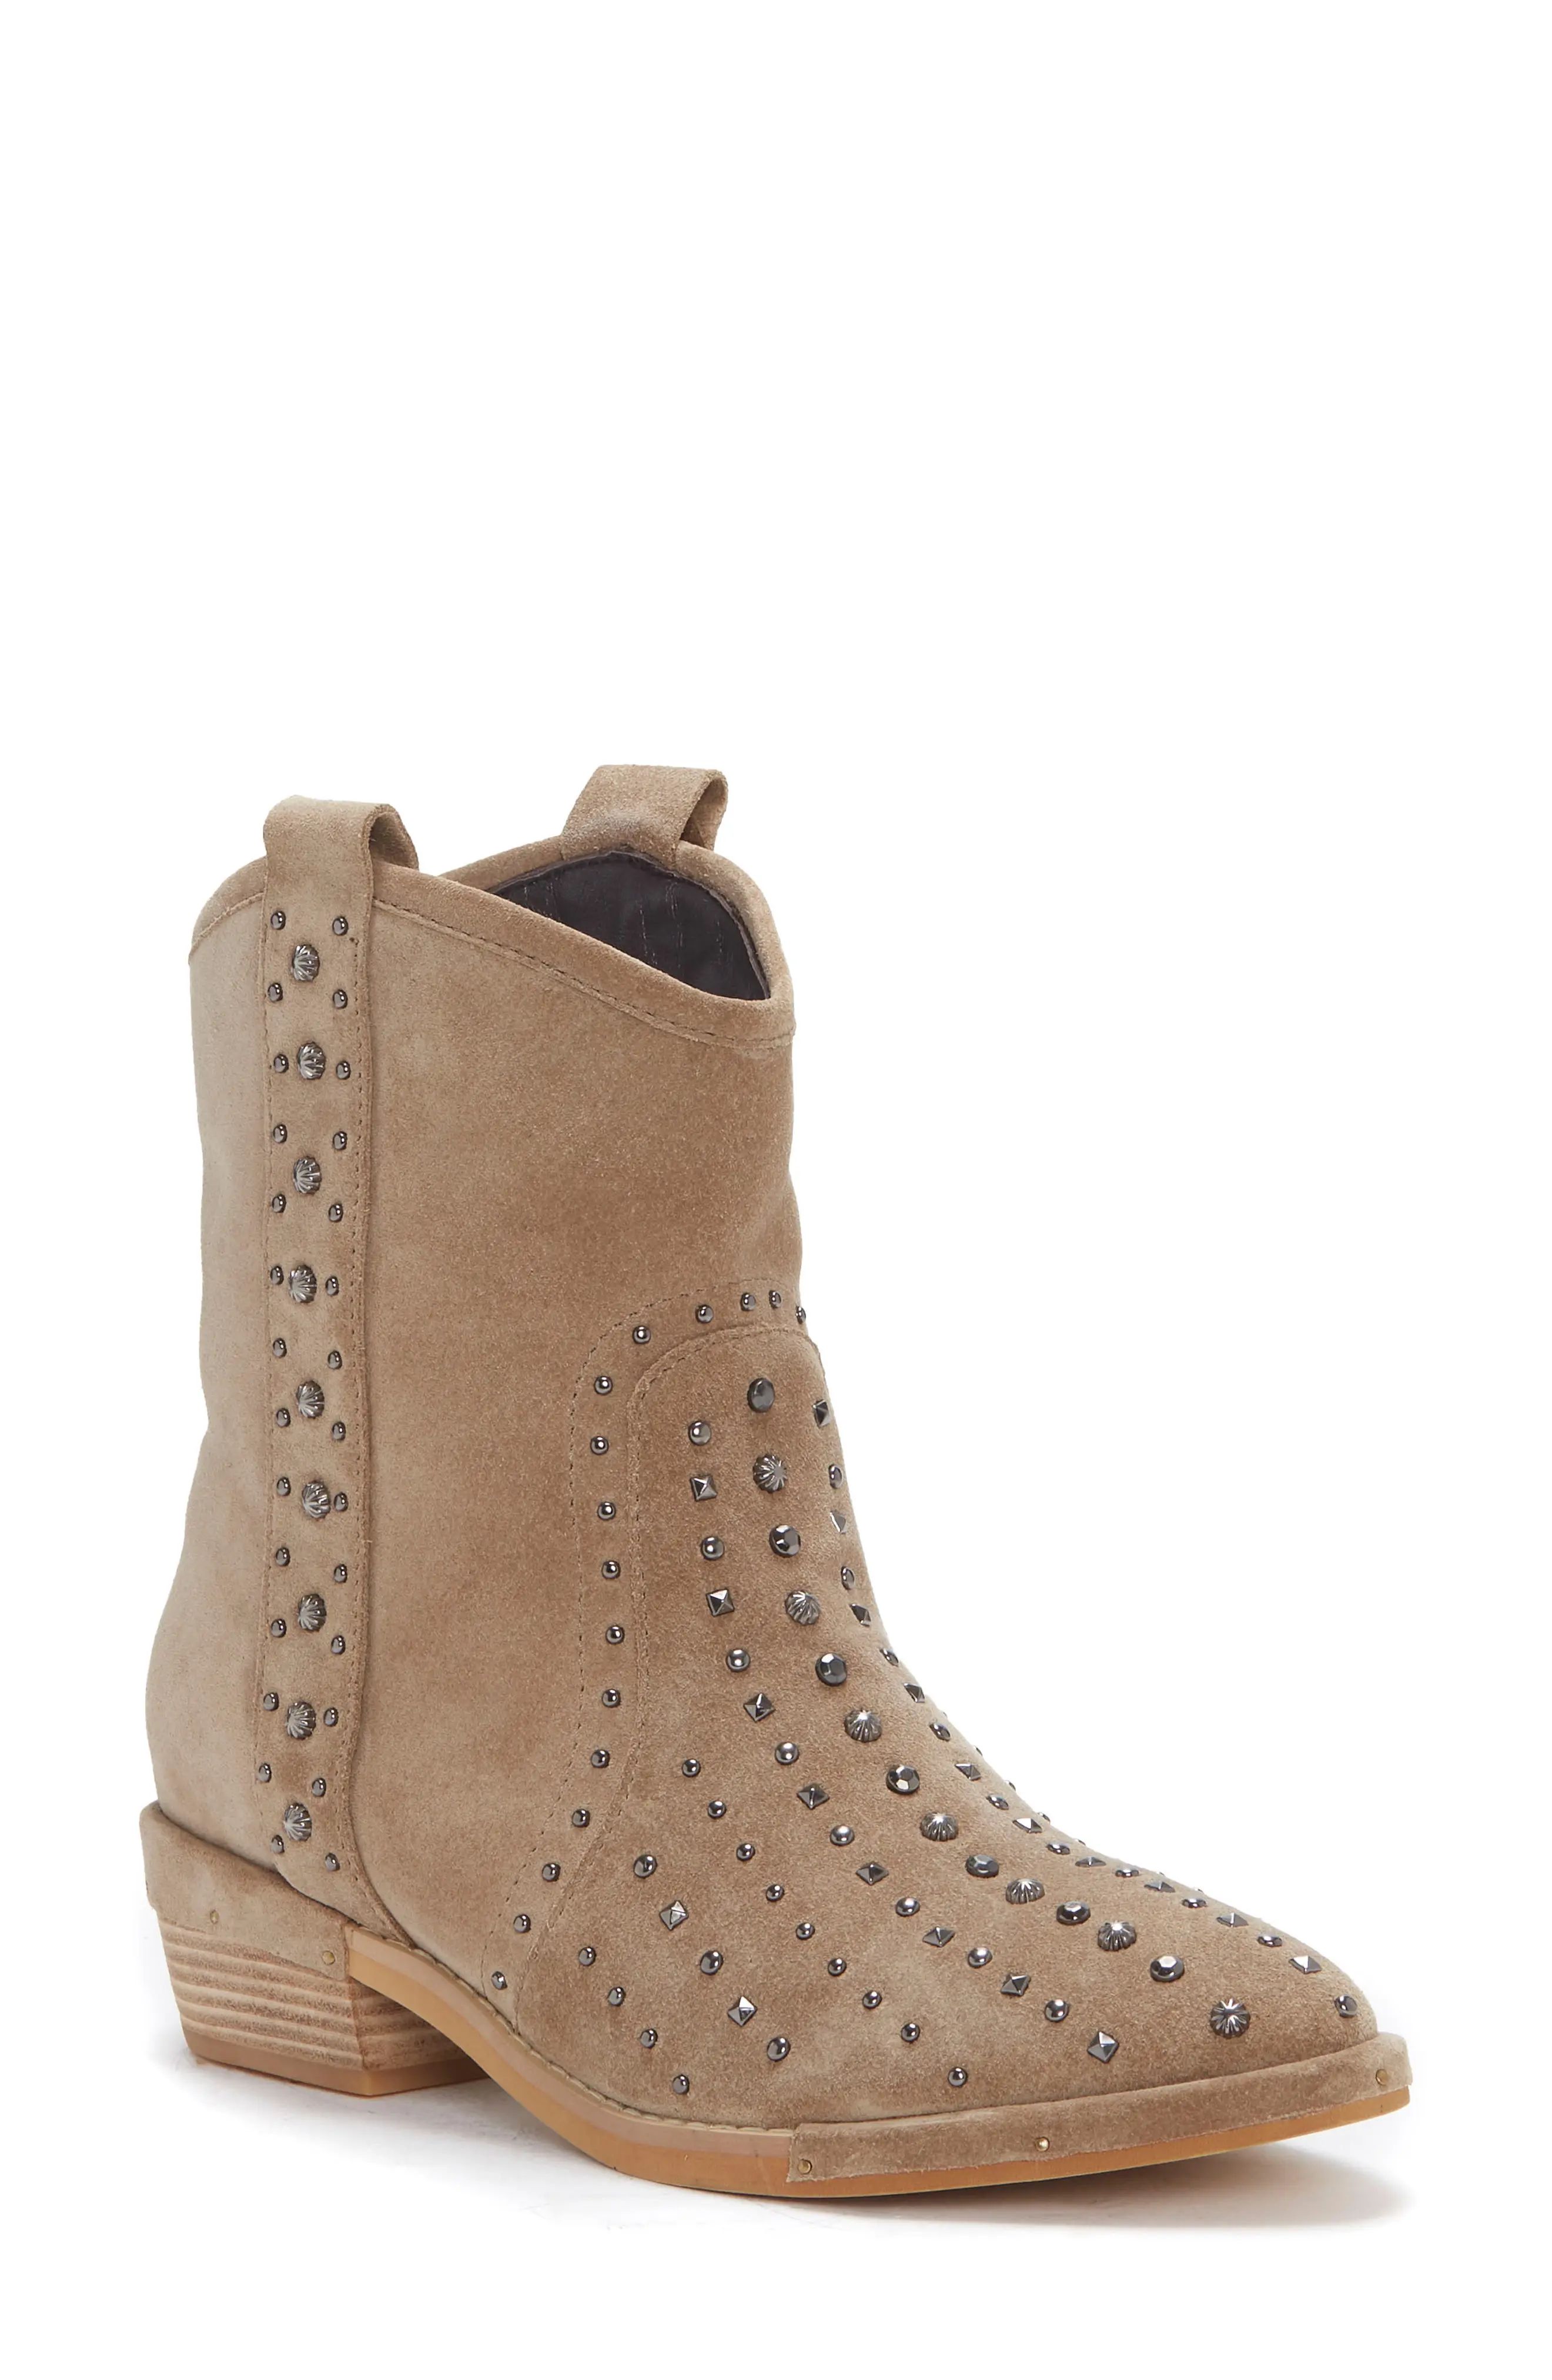 Vince Camuto Jephelis Western Boot, Size 8 in Vison at Nordstrom | Nordstrom